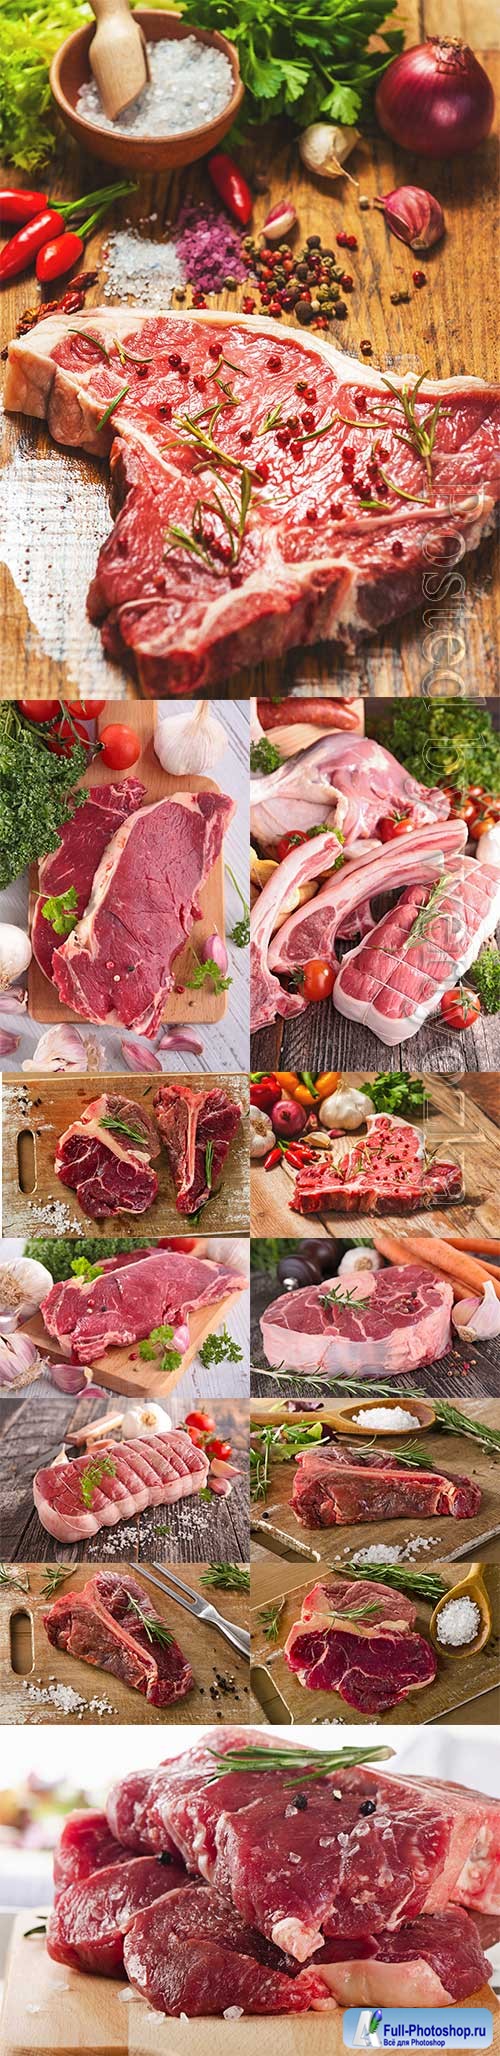 Fresh meat with vegetables and spices stock photo